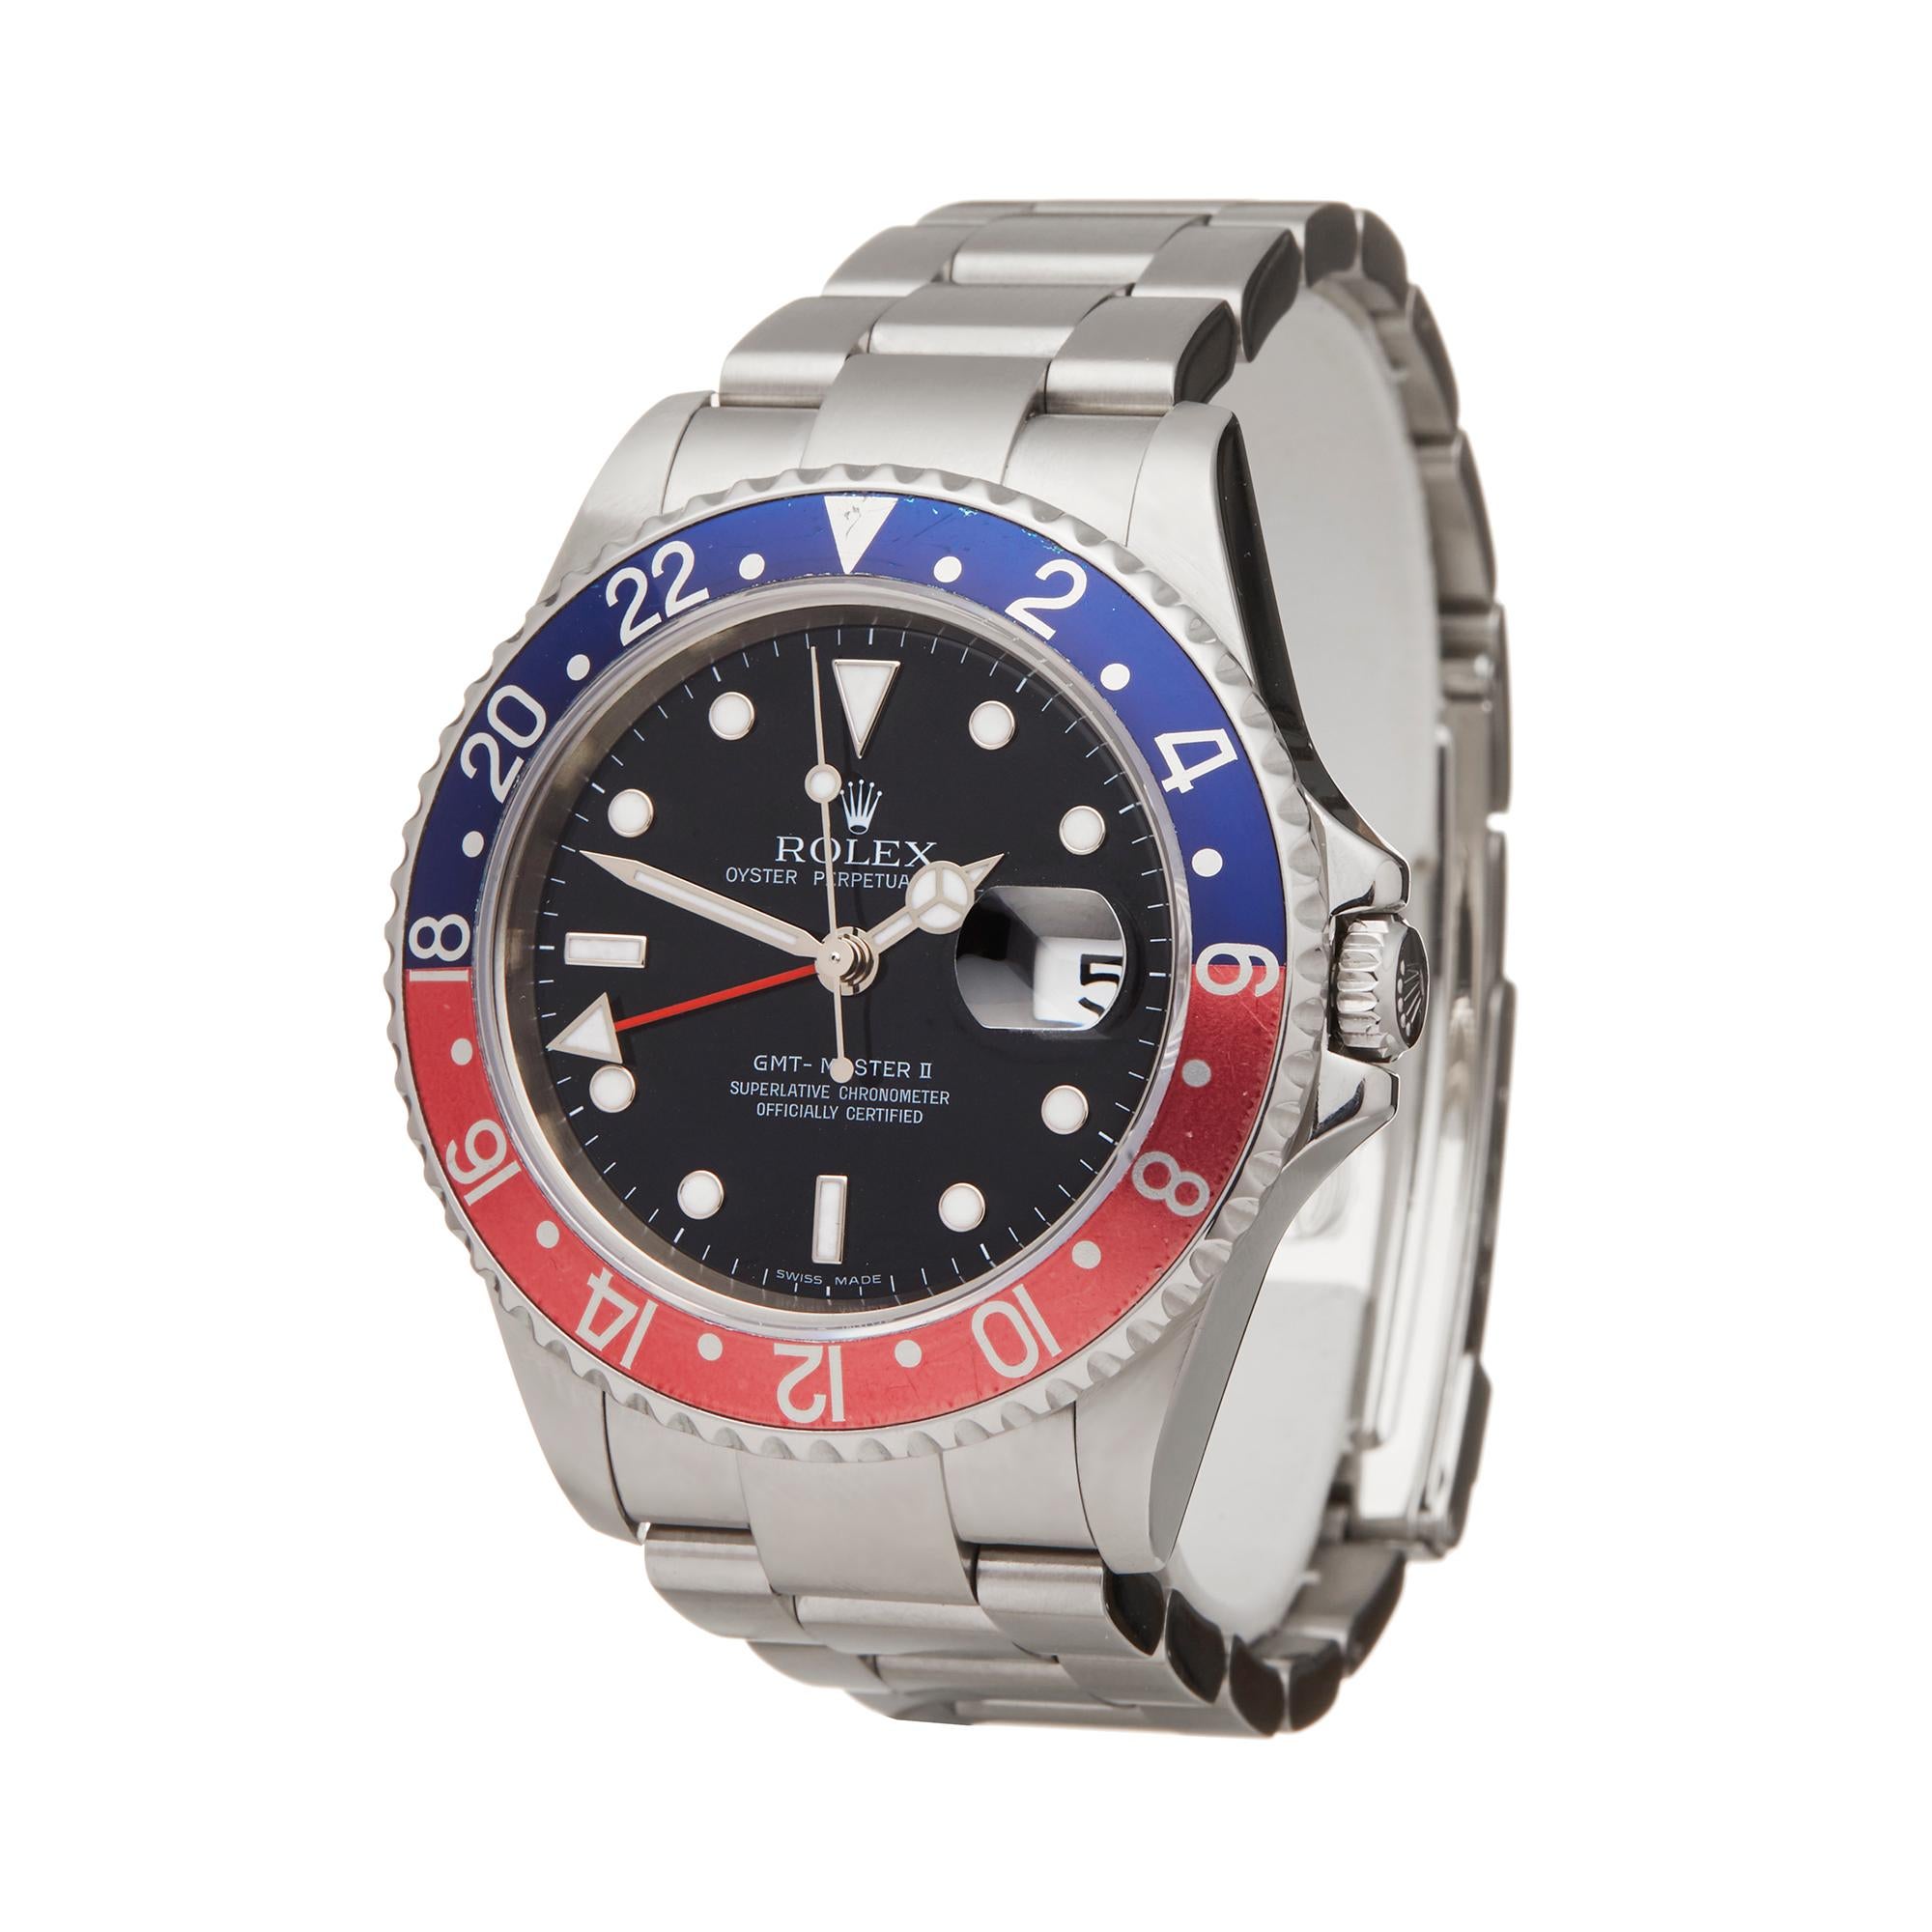 Reference :W5941
Manufacturer: Rolex
Model: GMT-Master II
Model Reference: 16710
Date: 17th September 2006
Gender: Men's
Box and Papers: Box and Guarantee Only
Dial: Black
Glass: Sapphire Crystal
Movement: Automatic
Water Resistance: To